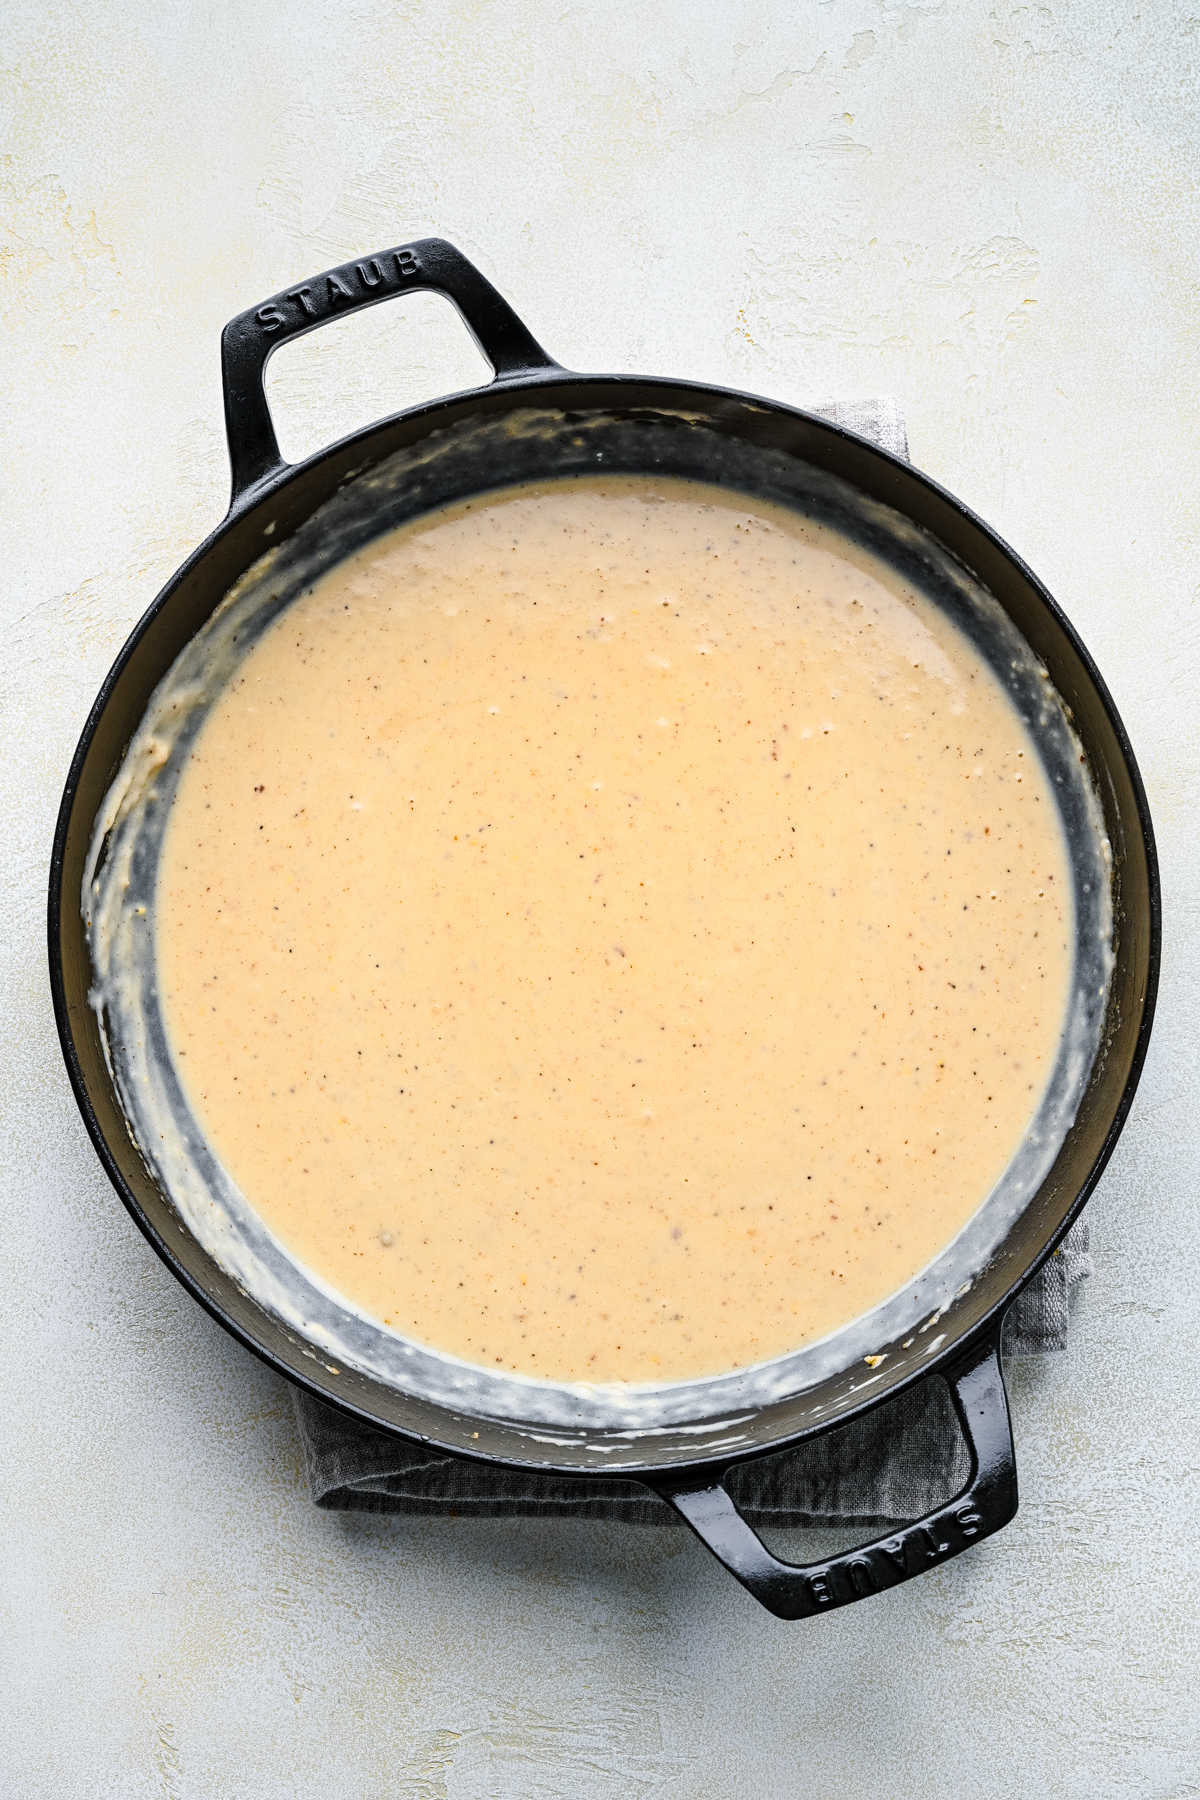 Sour cream stirred in thickened beef and cream mixture.